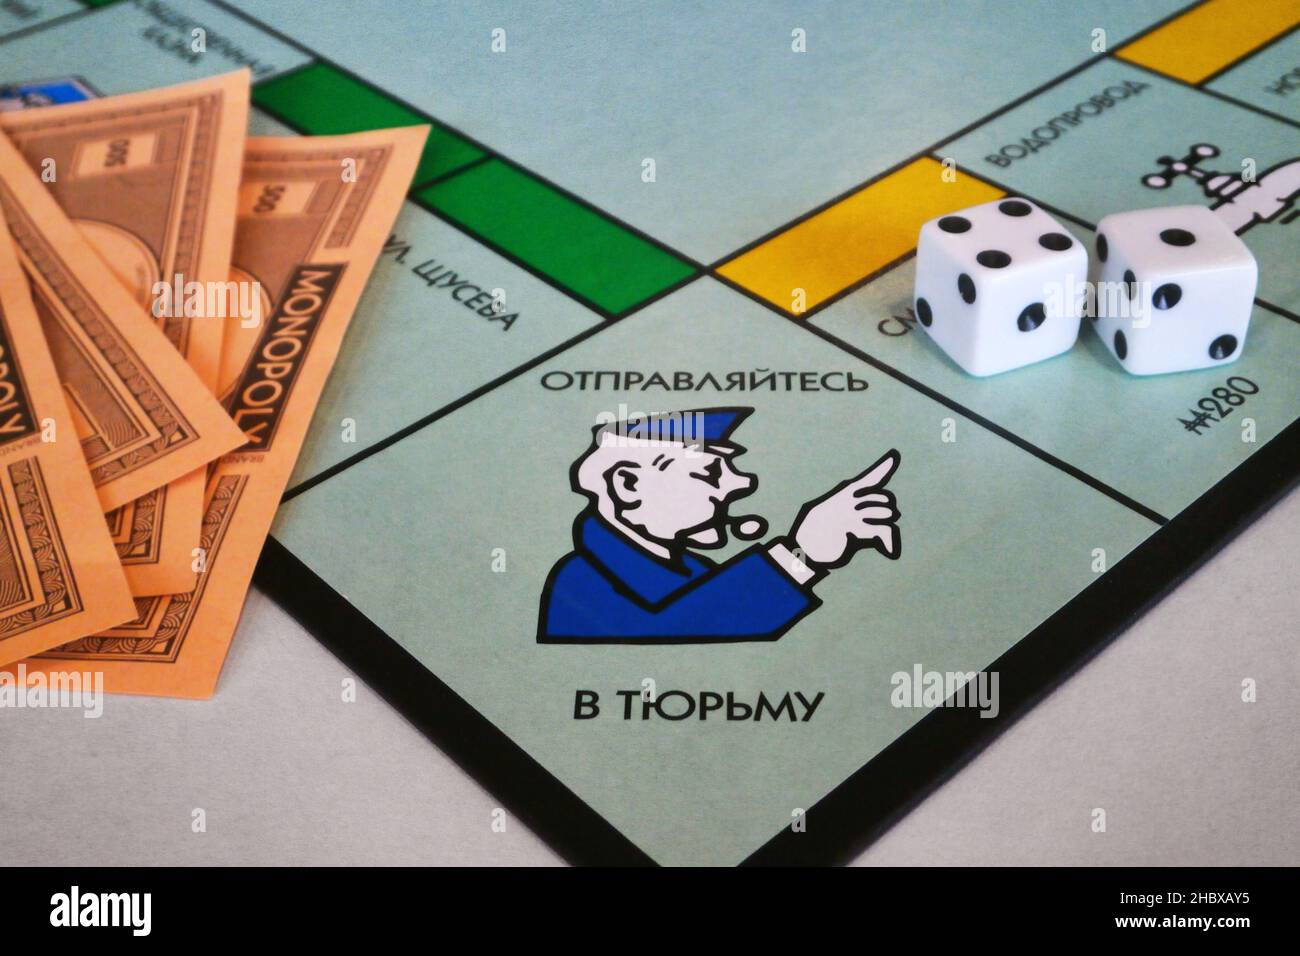 Moscow, Russia - July 24 2018: Close-up on a Russian game of Monopoly with it's well known 'GO TO JAIL' section. Stock Photo